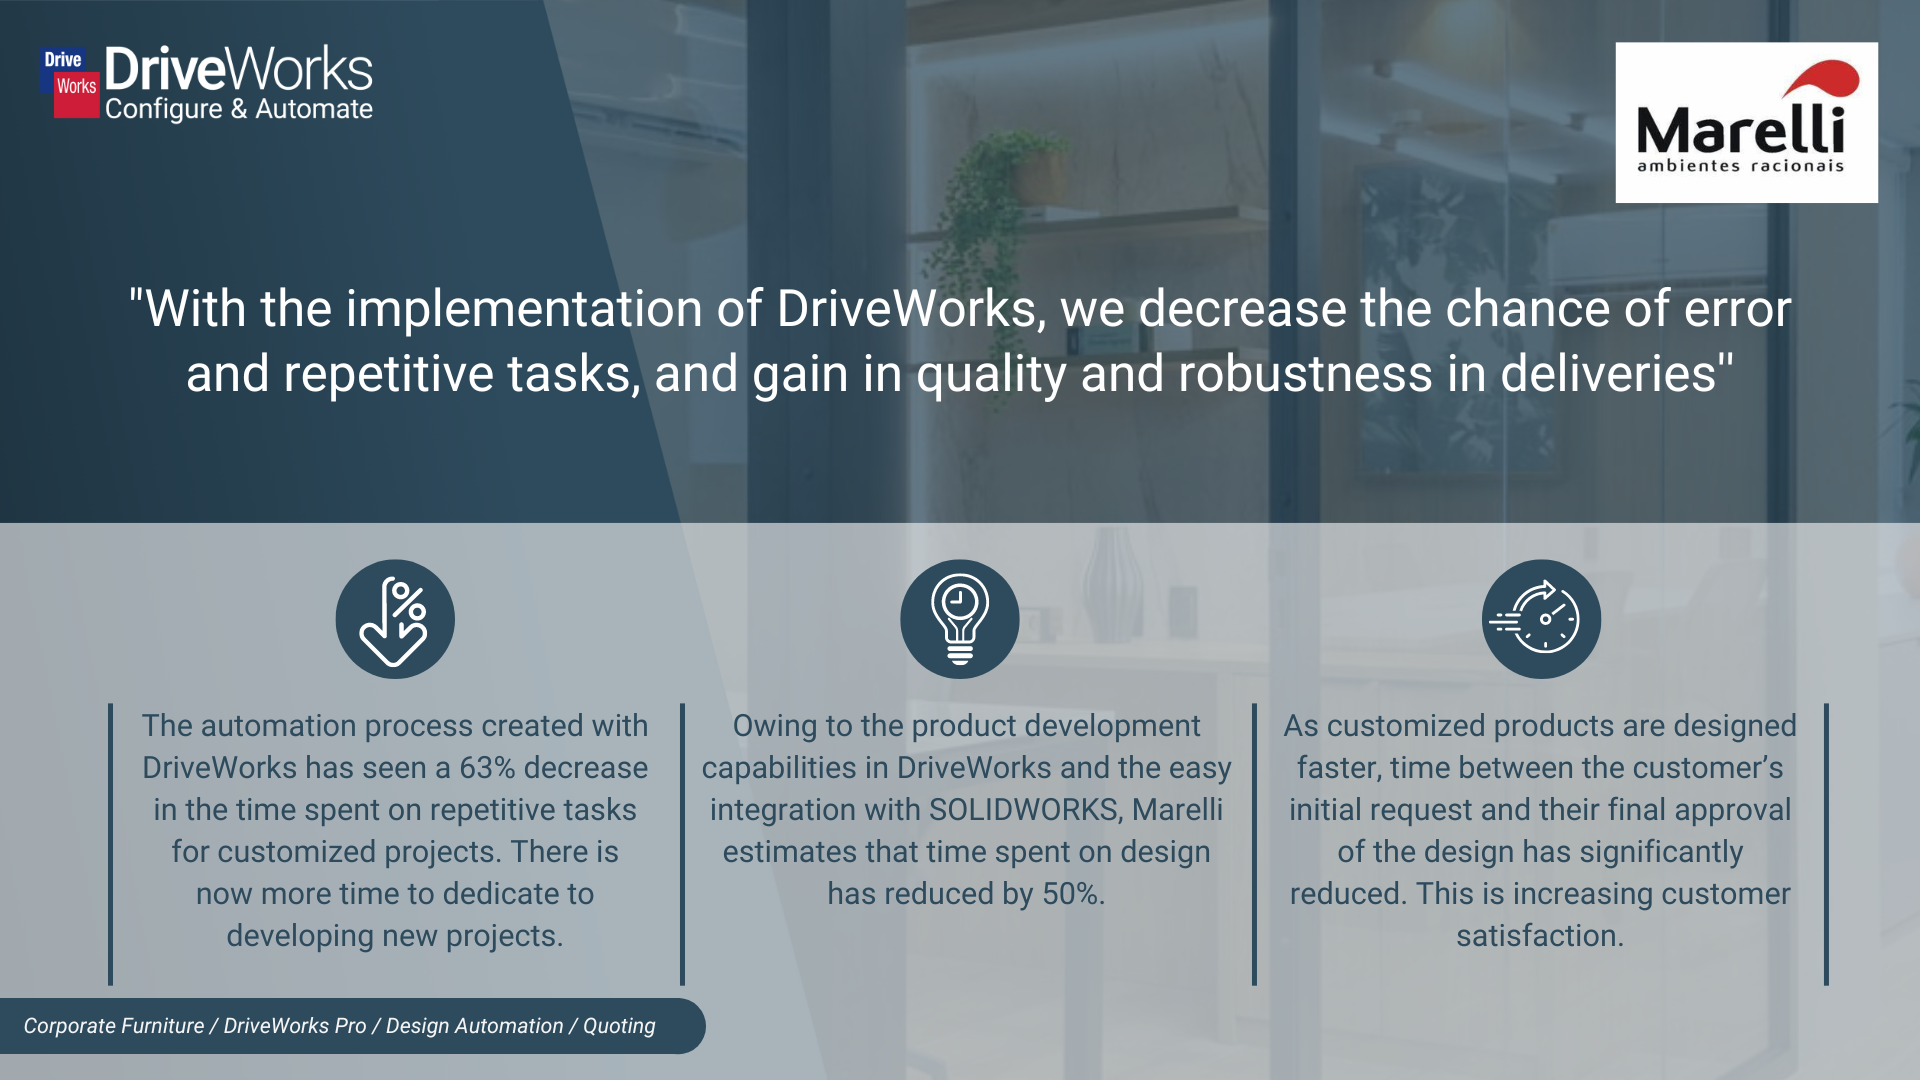 A graphic showing the benefits DriveWorks has had on Marelli. Text reads: "With the implementation of DriveWorks, we decrease the chance of error and repetitive tasks, and gain in quality and robustness in deliveries''. The automation process created with DriveWorks has seen a 63% decrease in the time spent on repetitive tasks for customized projects. There is now more time to dedicate to developing new projects. Owing to the product development capabilities in DriveWorks and the easy integration with SOLIDWORKS, Marelli estimates that time spent on design has reduced by 50%. As customized products are designed faster, time between the customer’s initial request and their final approval of the design has significantly reduced. This is increasing customer satisfaction.